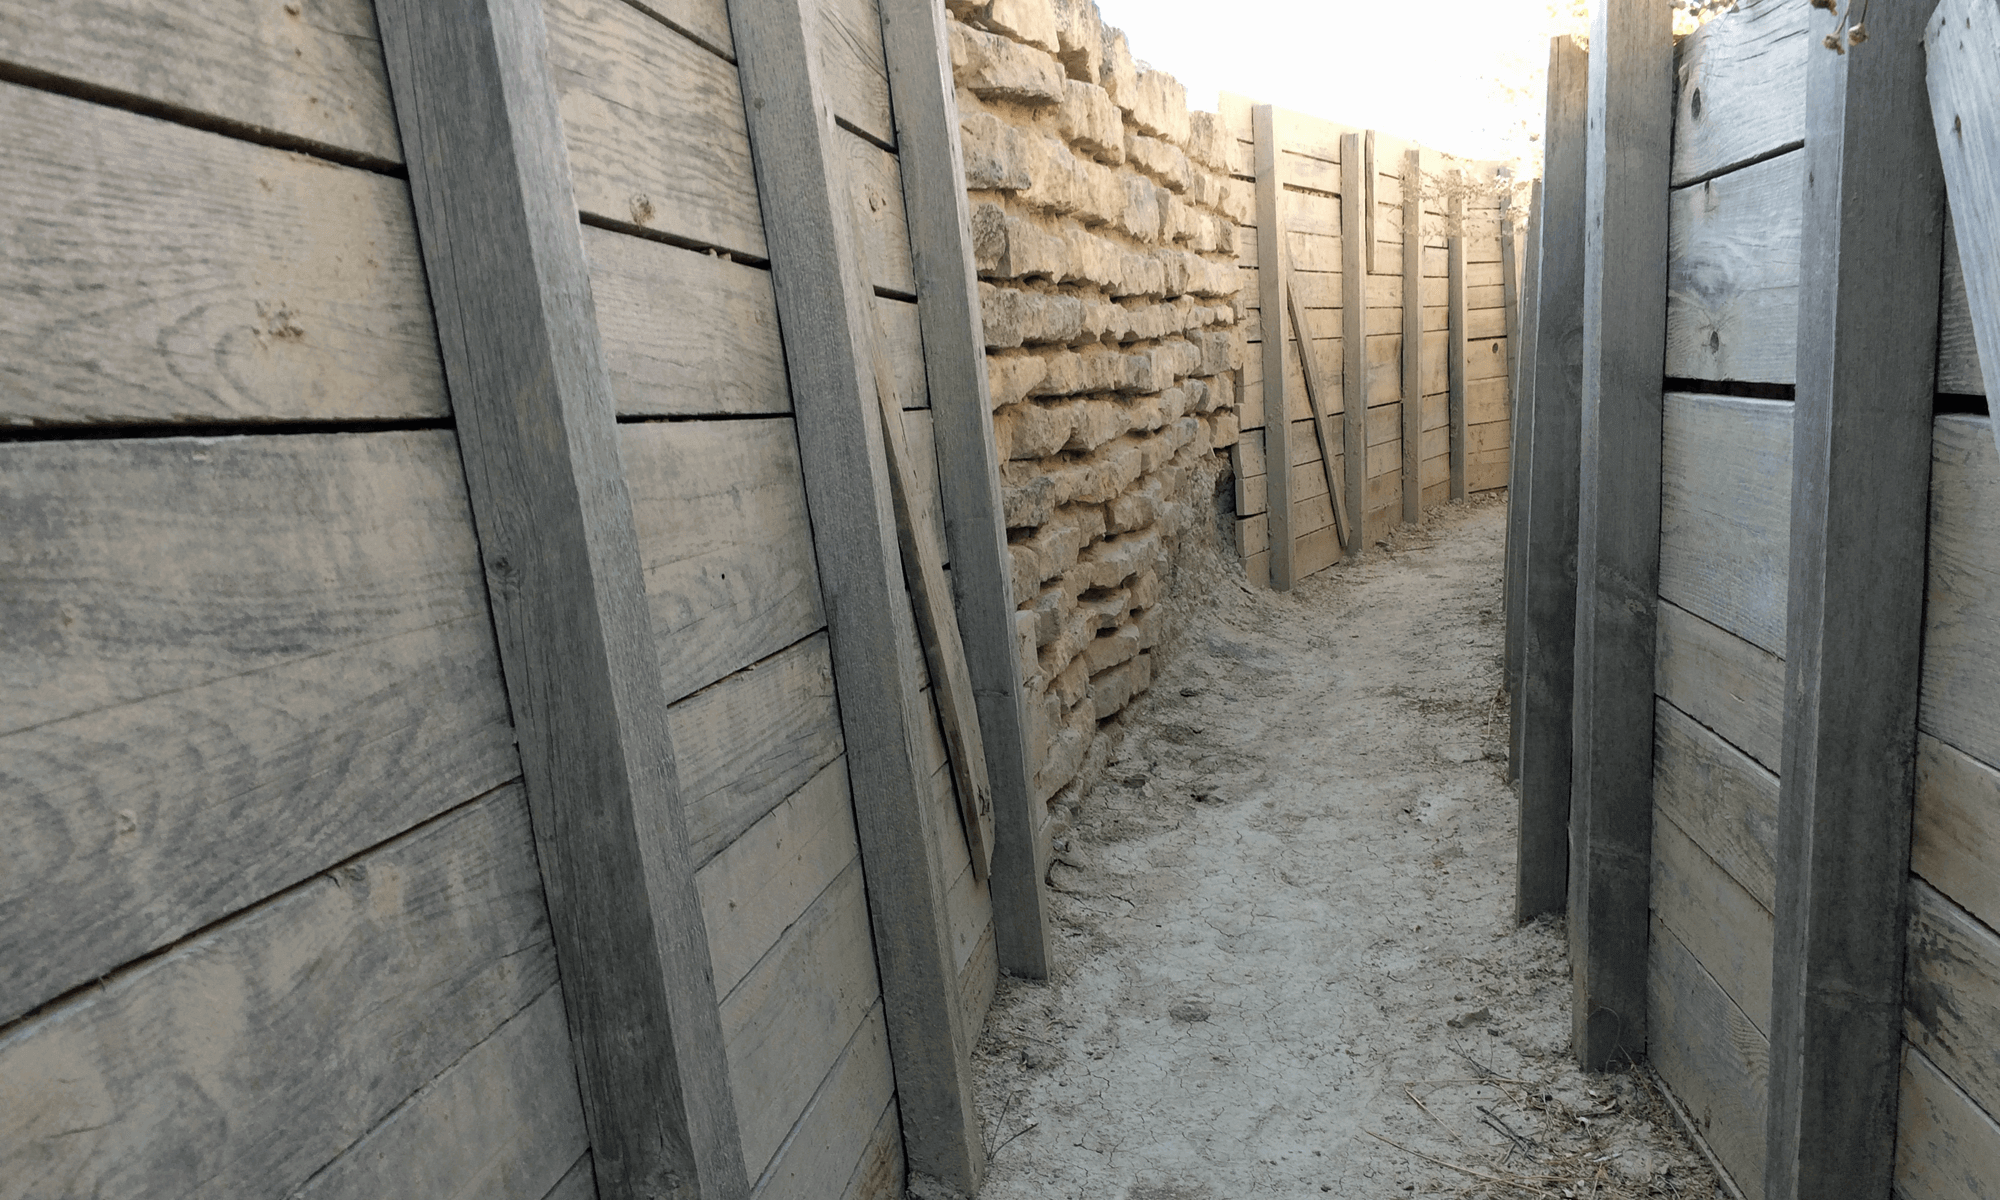 George Orwell Trenches in the Monegros, Spain